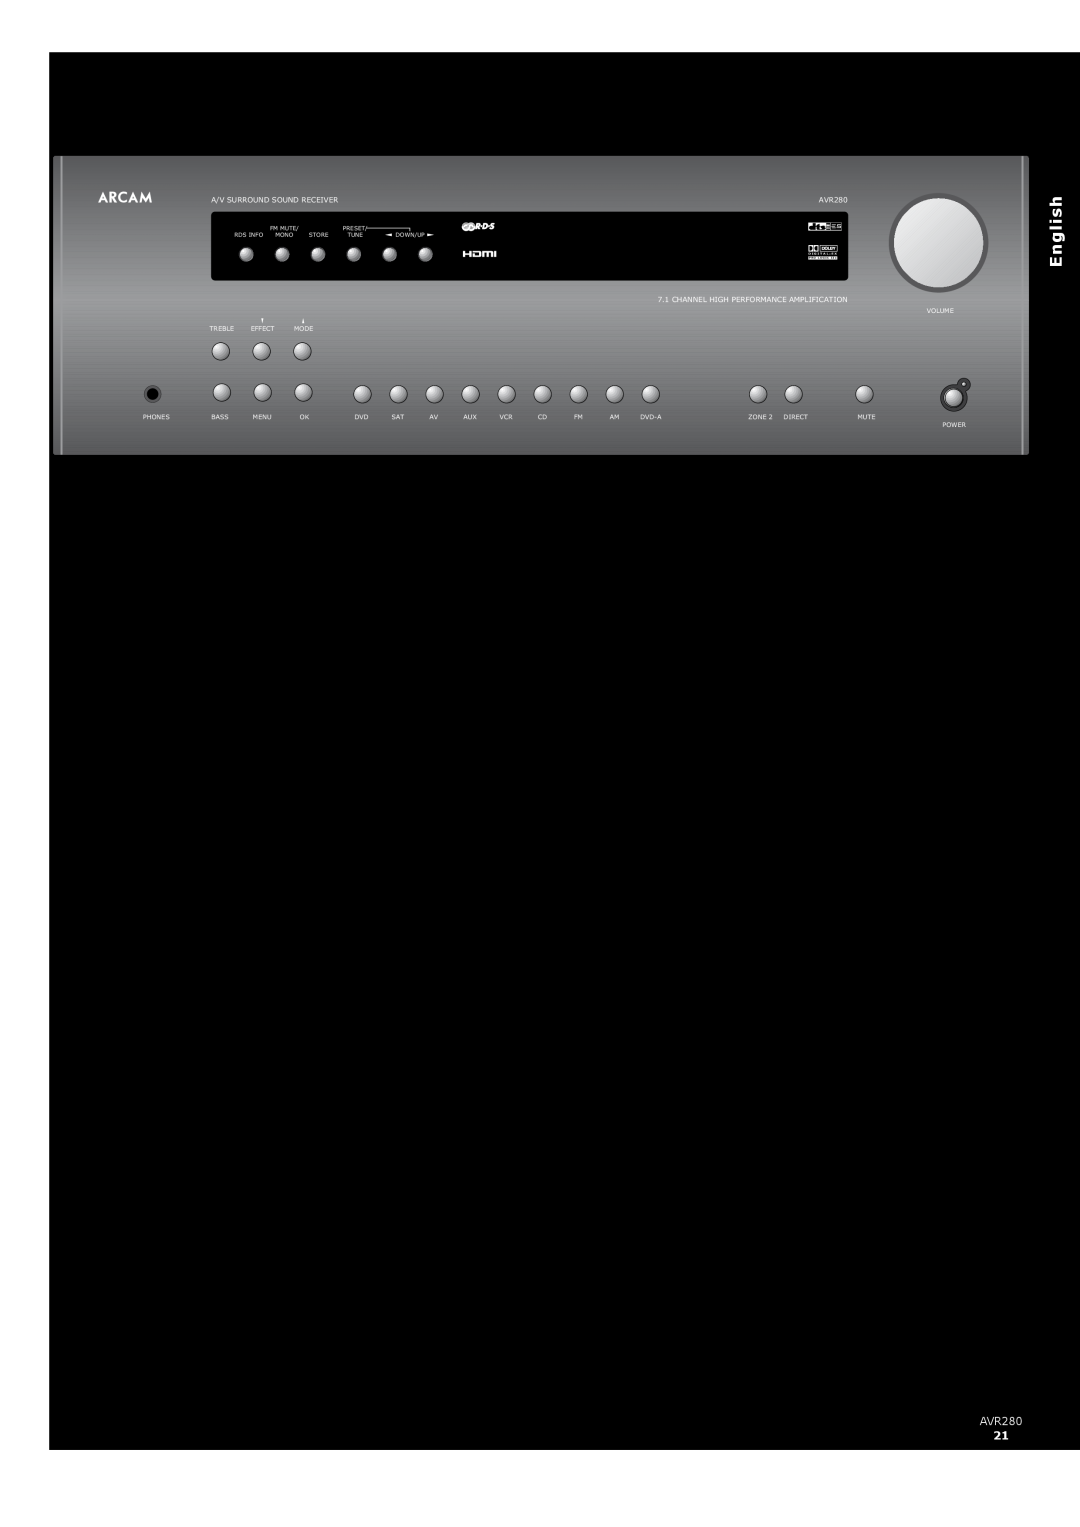 Arcam manual Operating your AVR280, Switching on/off, Volume control, Front panel display, Stand-by, Muting the volume 